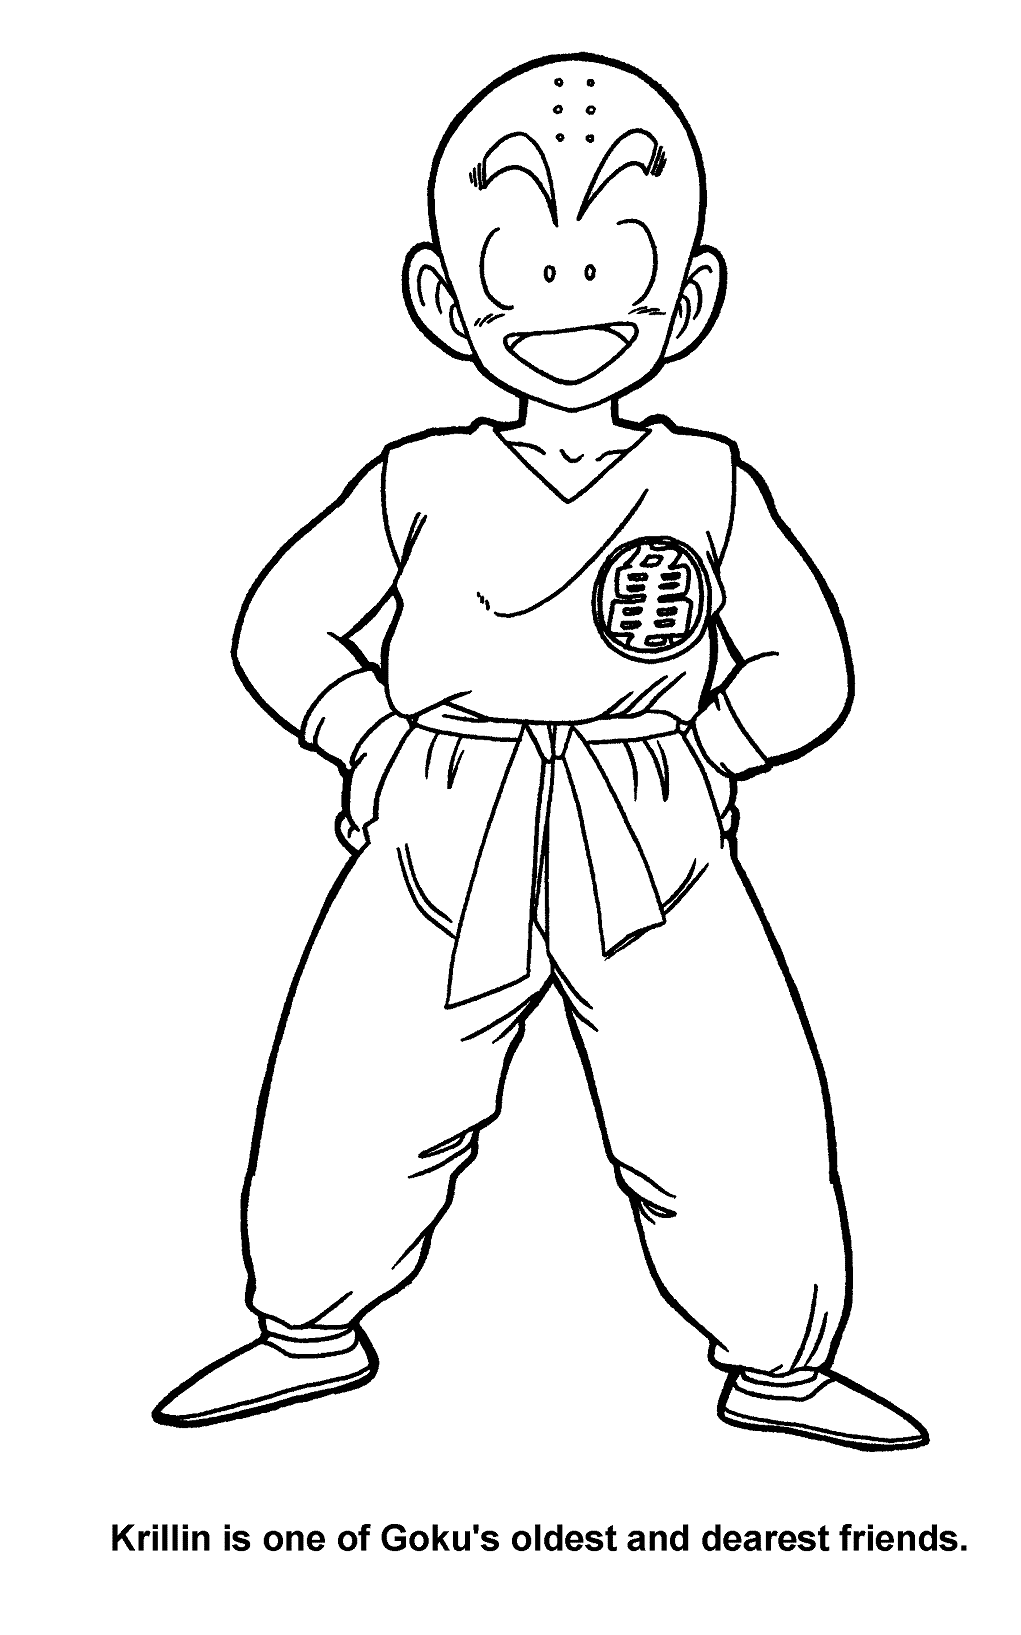 Krillin from Dragon Ball Z Coloring Page